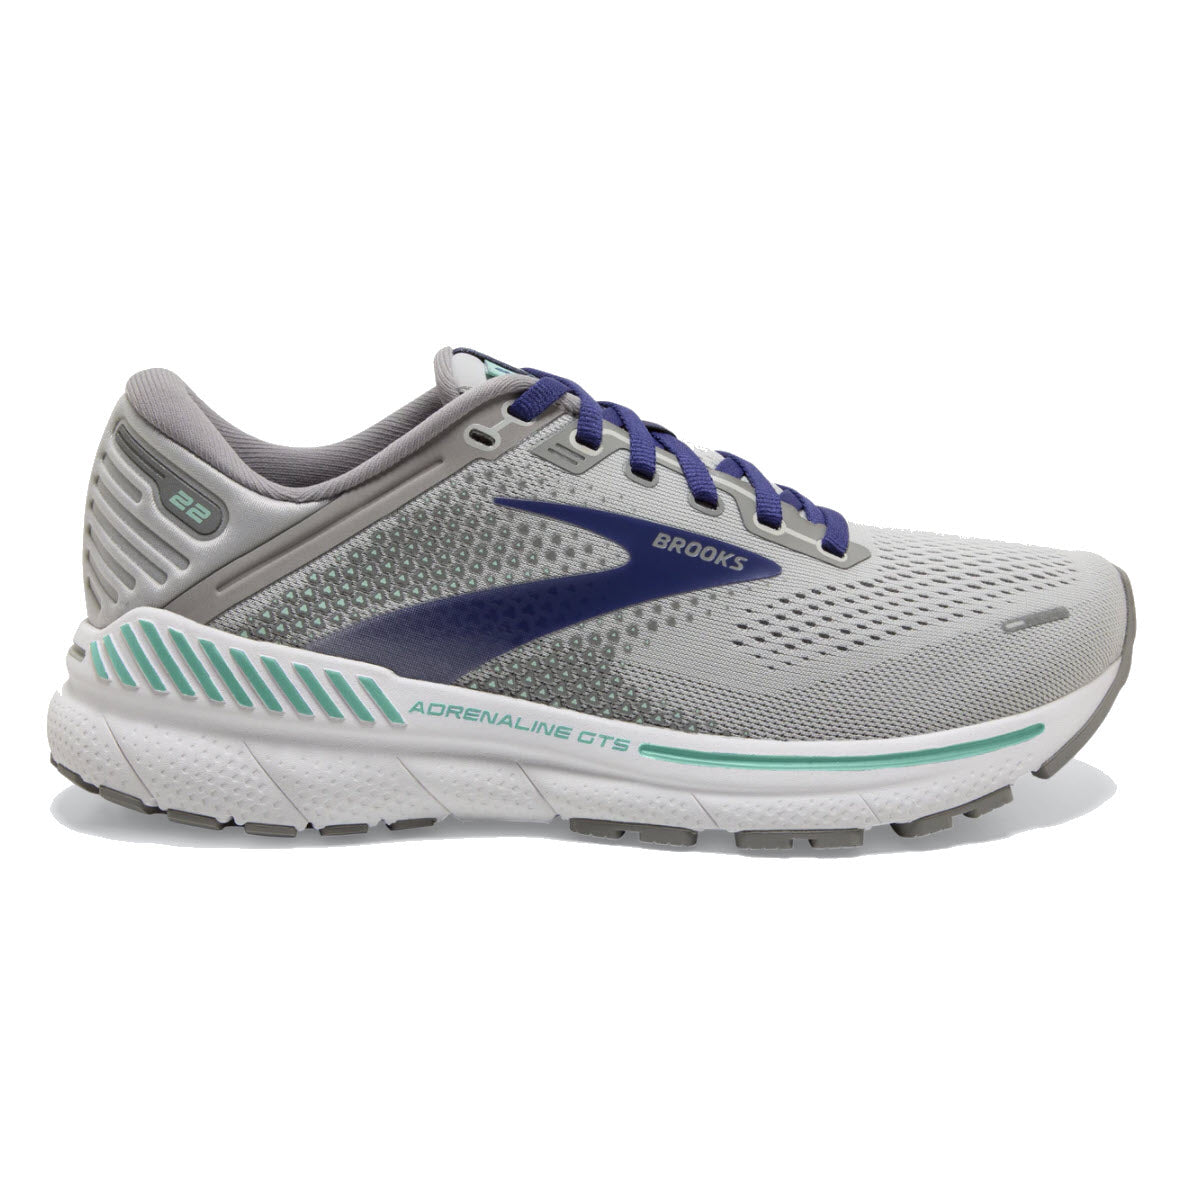 A single Brooks Adrenaline GTS 22 Alloy/Blue/Green running shoe displayed from a side angle.